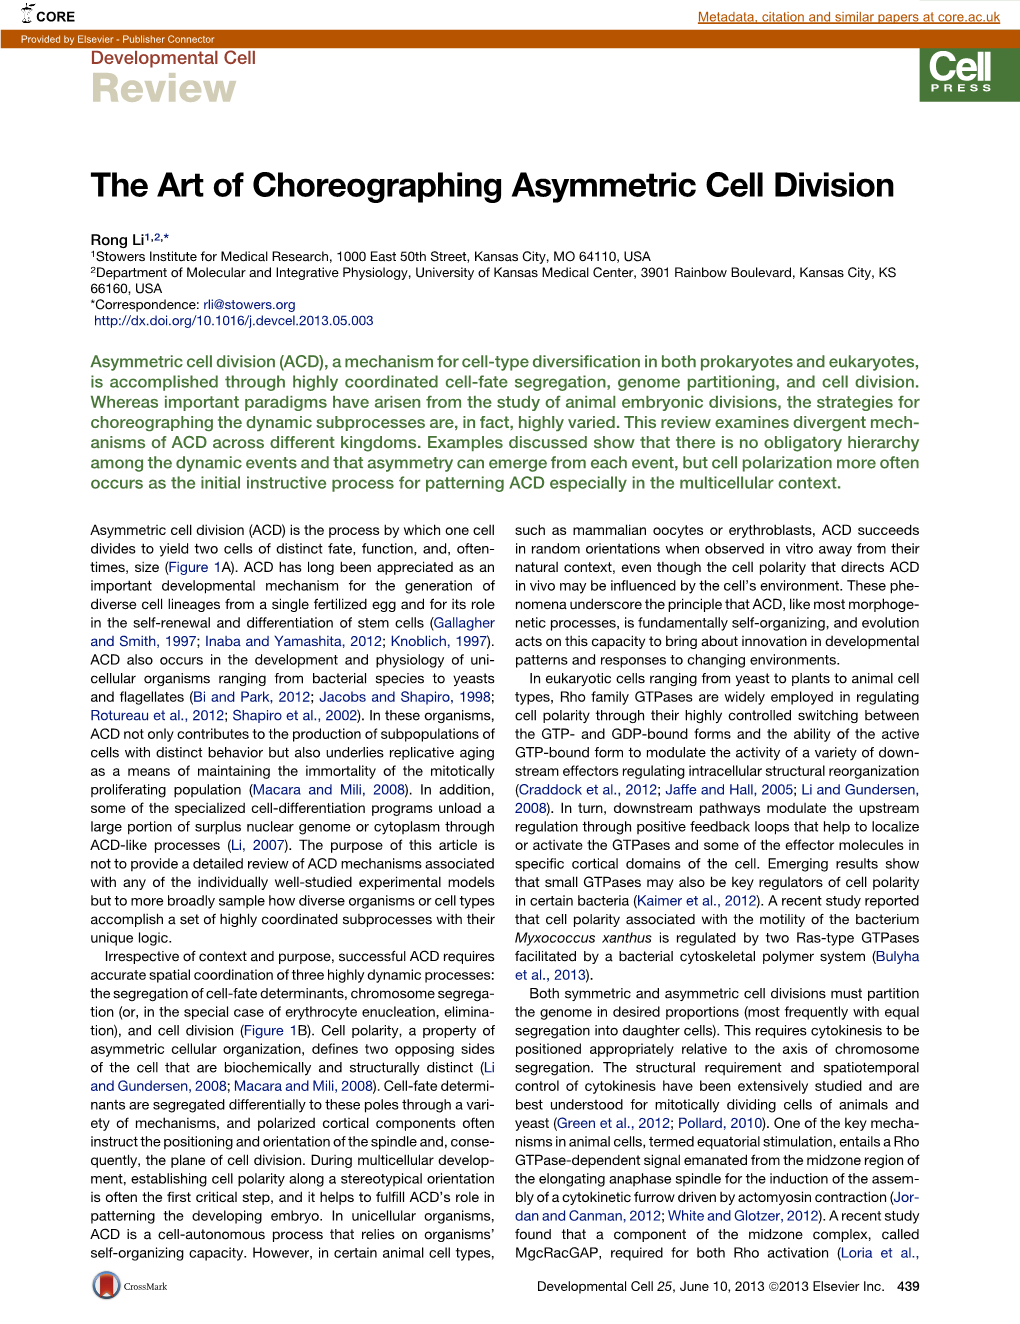 The Art of Choreographing Asymmetric Cell Division